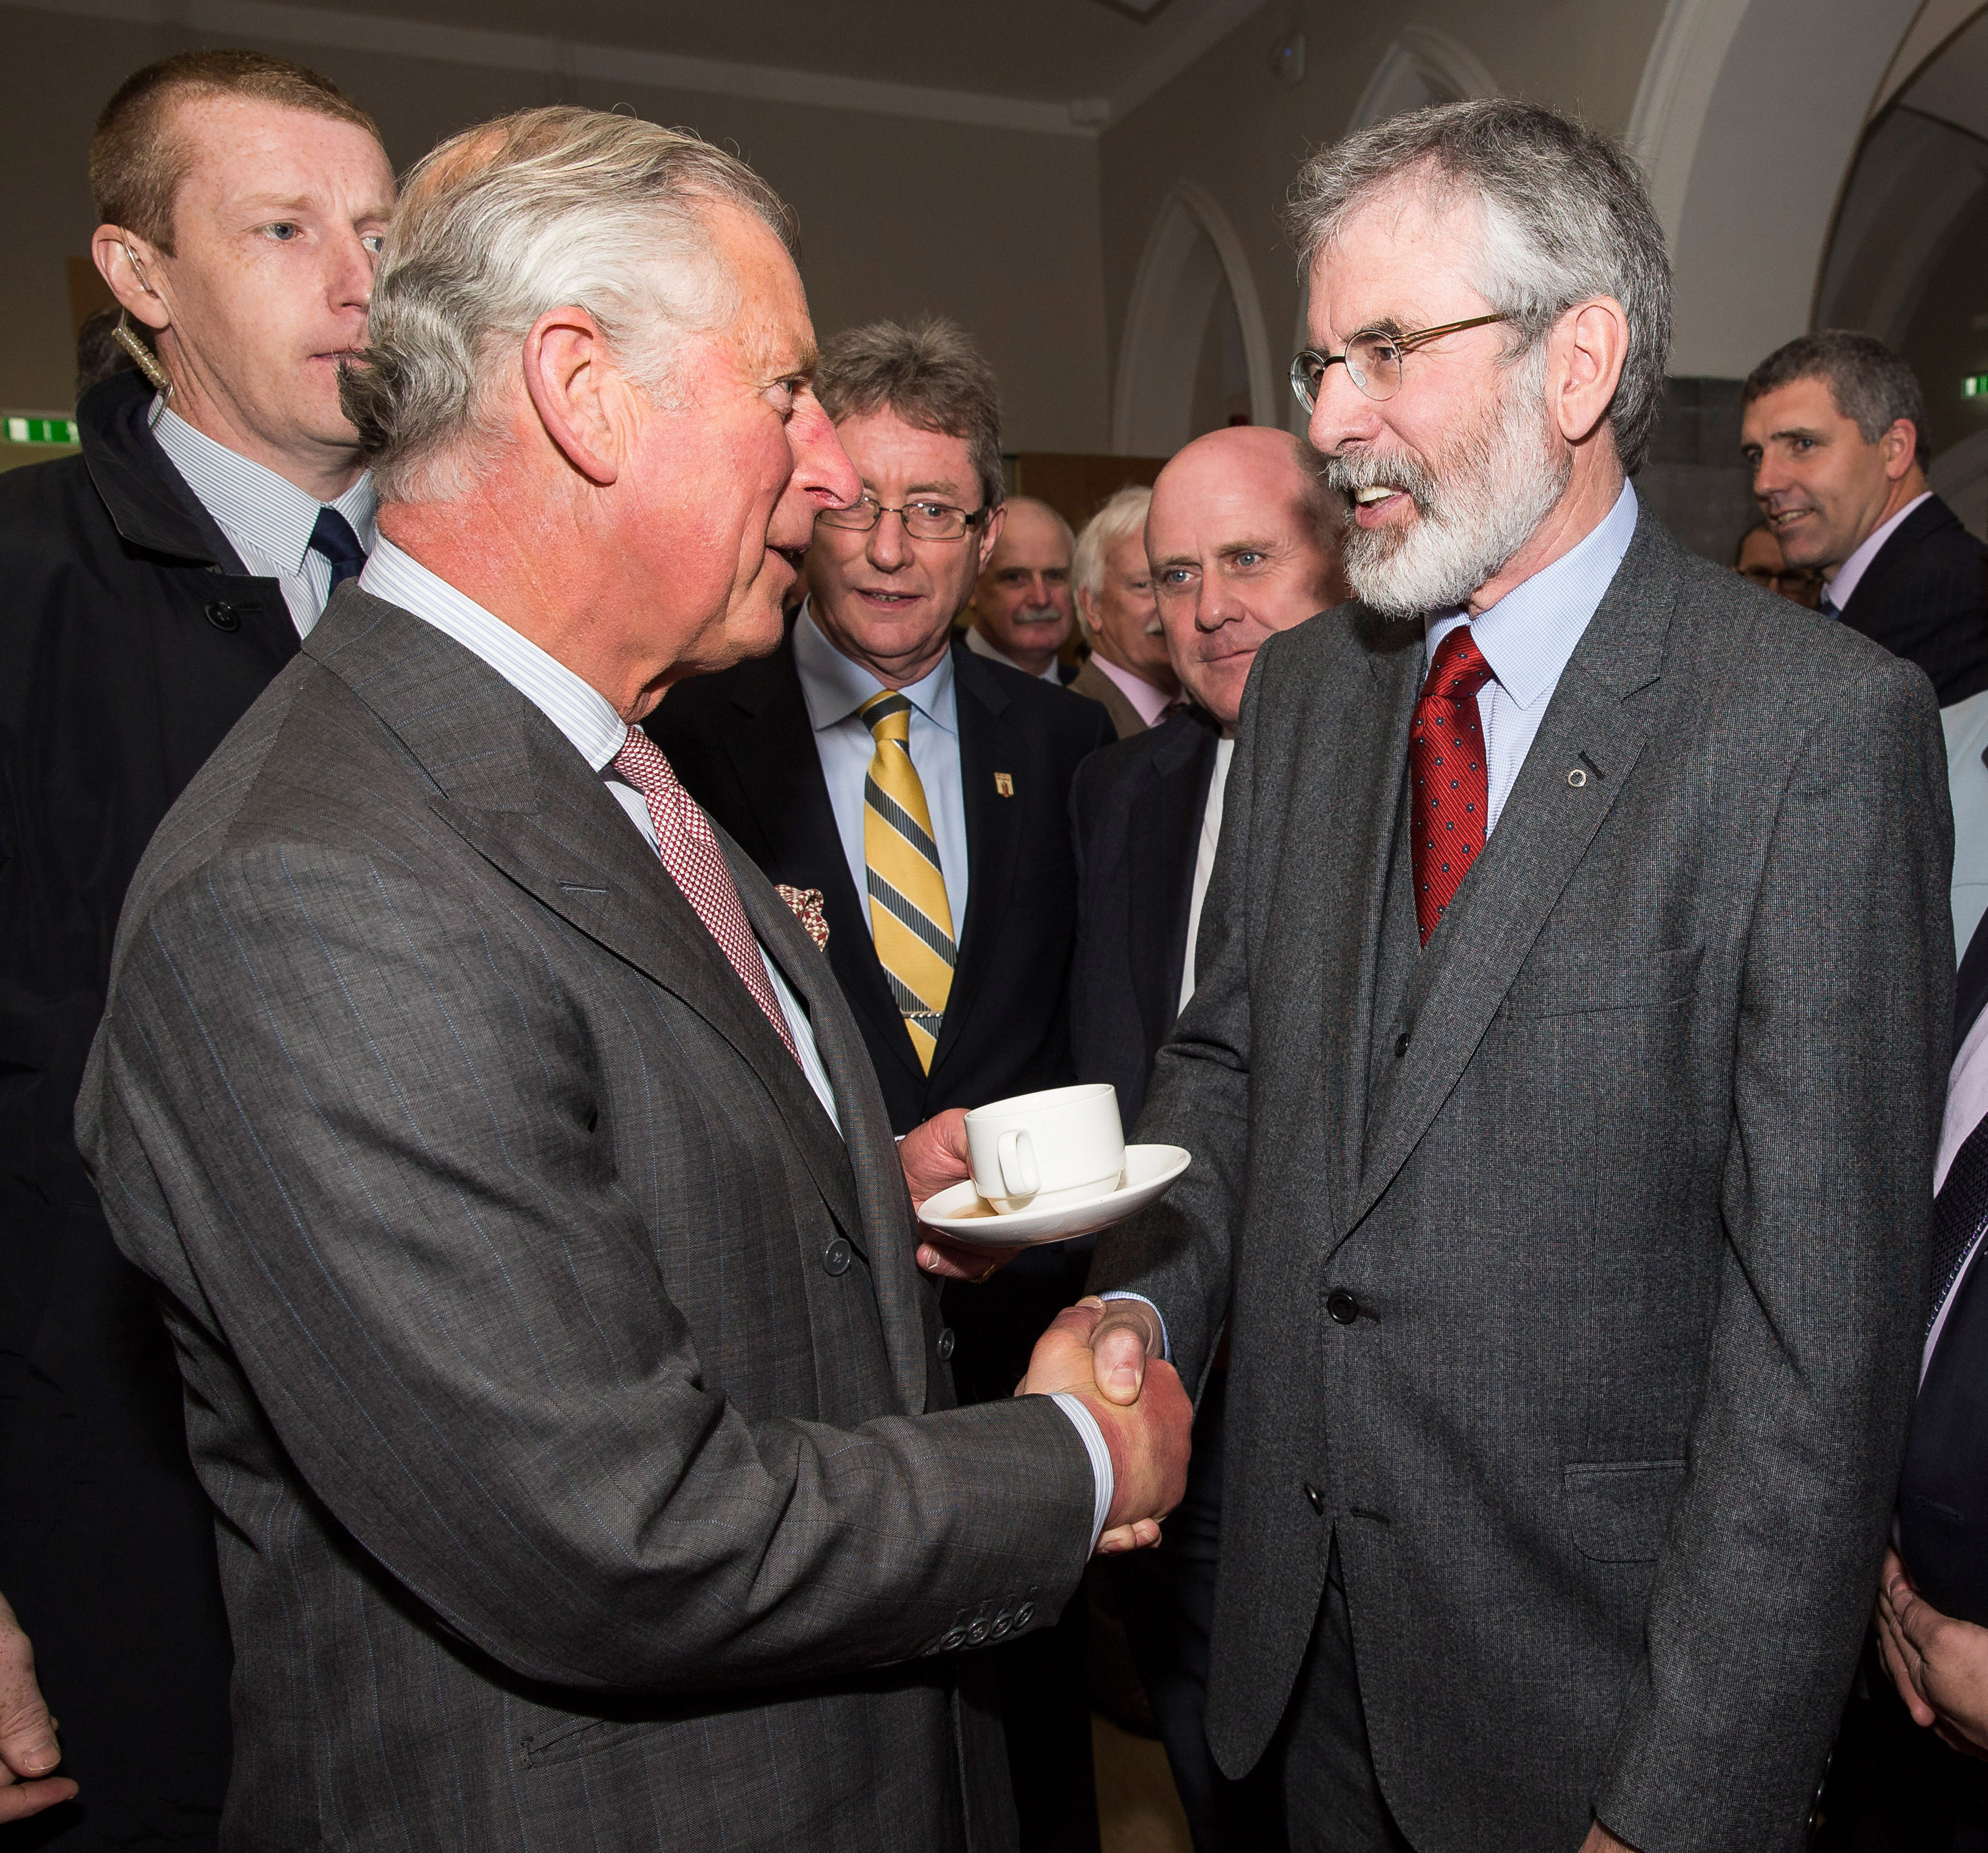 GALWAY, IRELAND - MAY 19:   Prince Charles, Prince Of Wales shakes hands with Sinn Fein president Gerry Adams at the National University of Ireland on May 19, 2015 in Galway, Ireland. The Prince of Wales and Duchess of Cornwall arrived in Ireland today for their four day visit to the Republic and Northern Ireland, the visit has been described by the British Embassy as another important step in promoting peace and reconciliation. (Photo by Adam Gerrard - WPA Pool/Getty Images) (WPA Pool&amp;mdash;Getty Images)